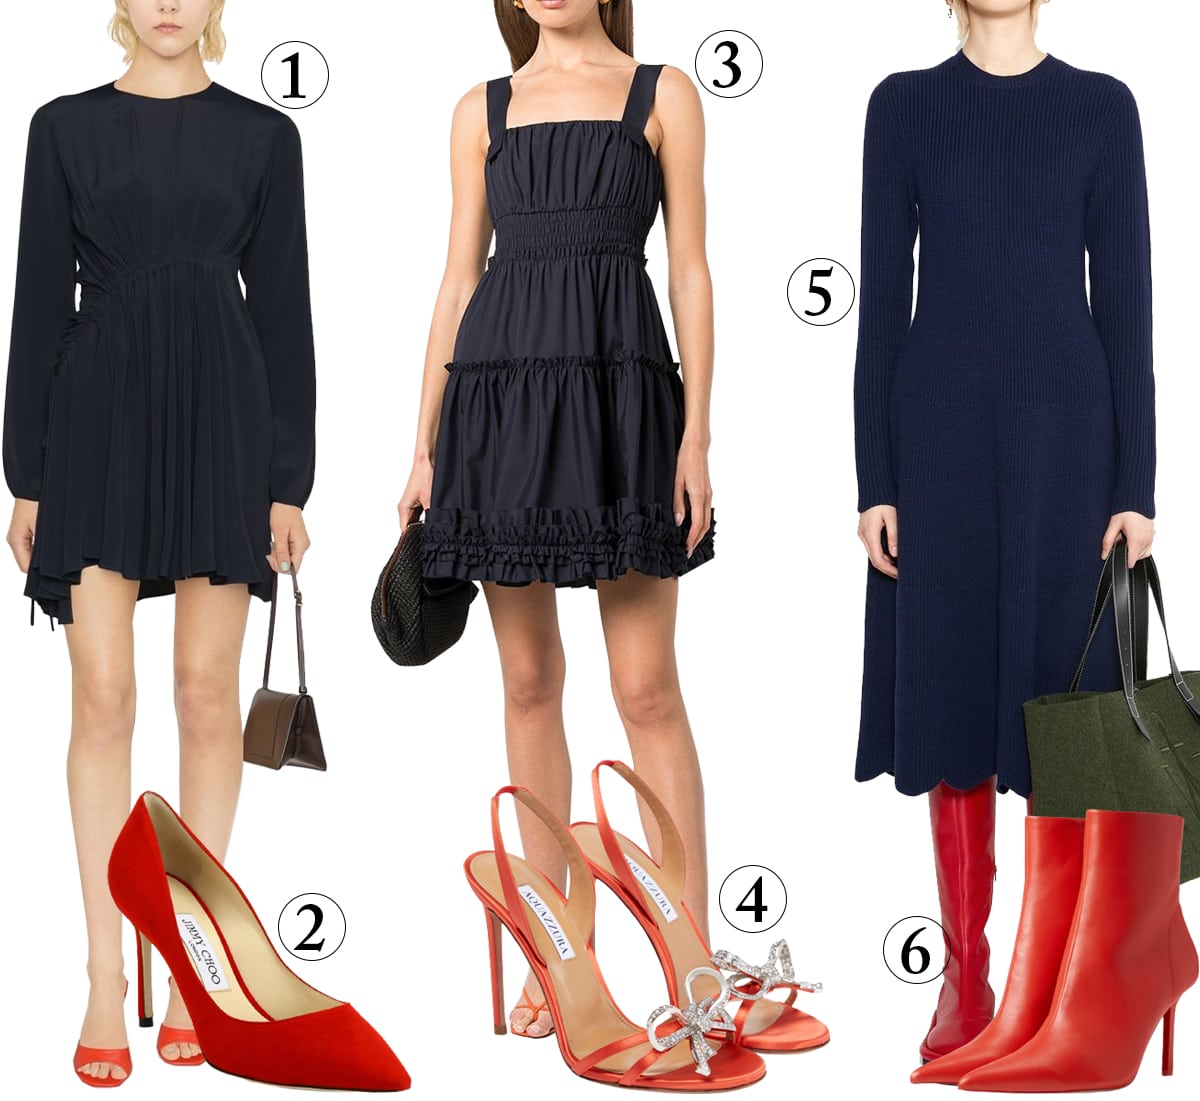 Outfits with red shoes and navy dresses